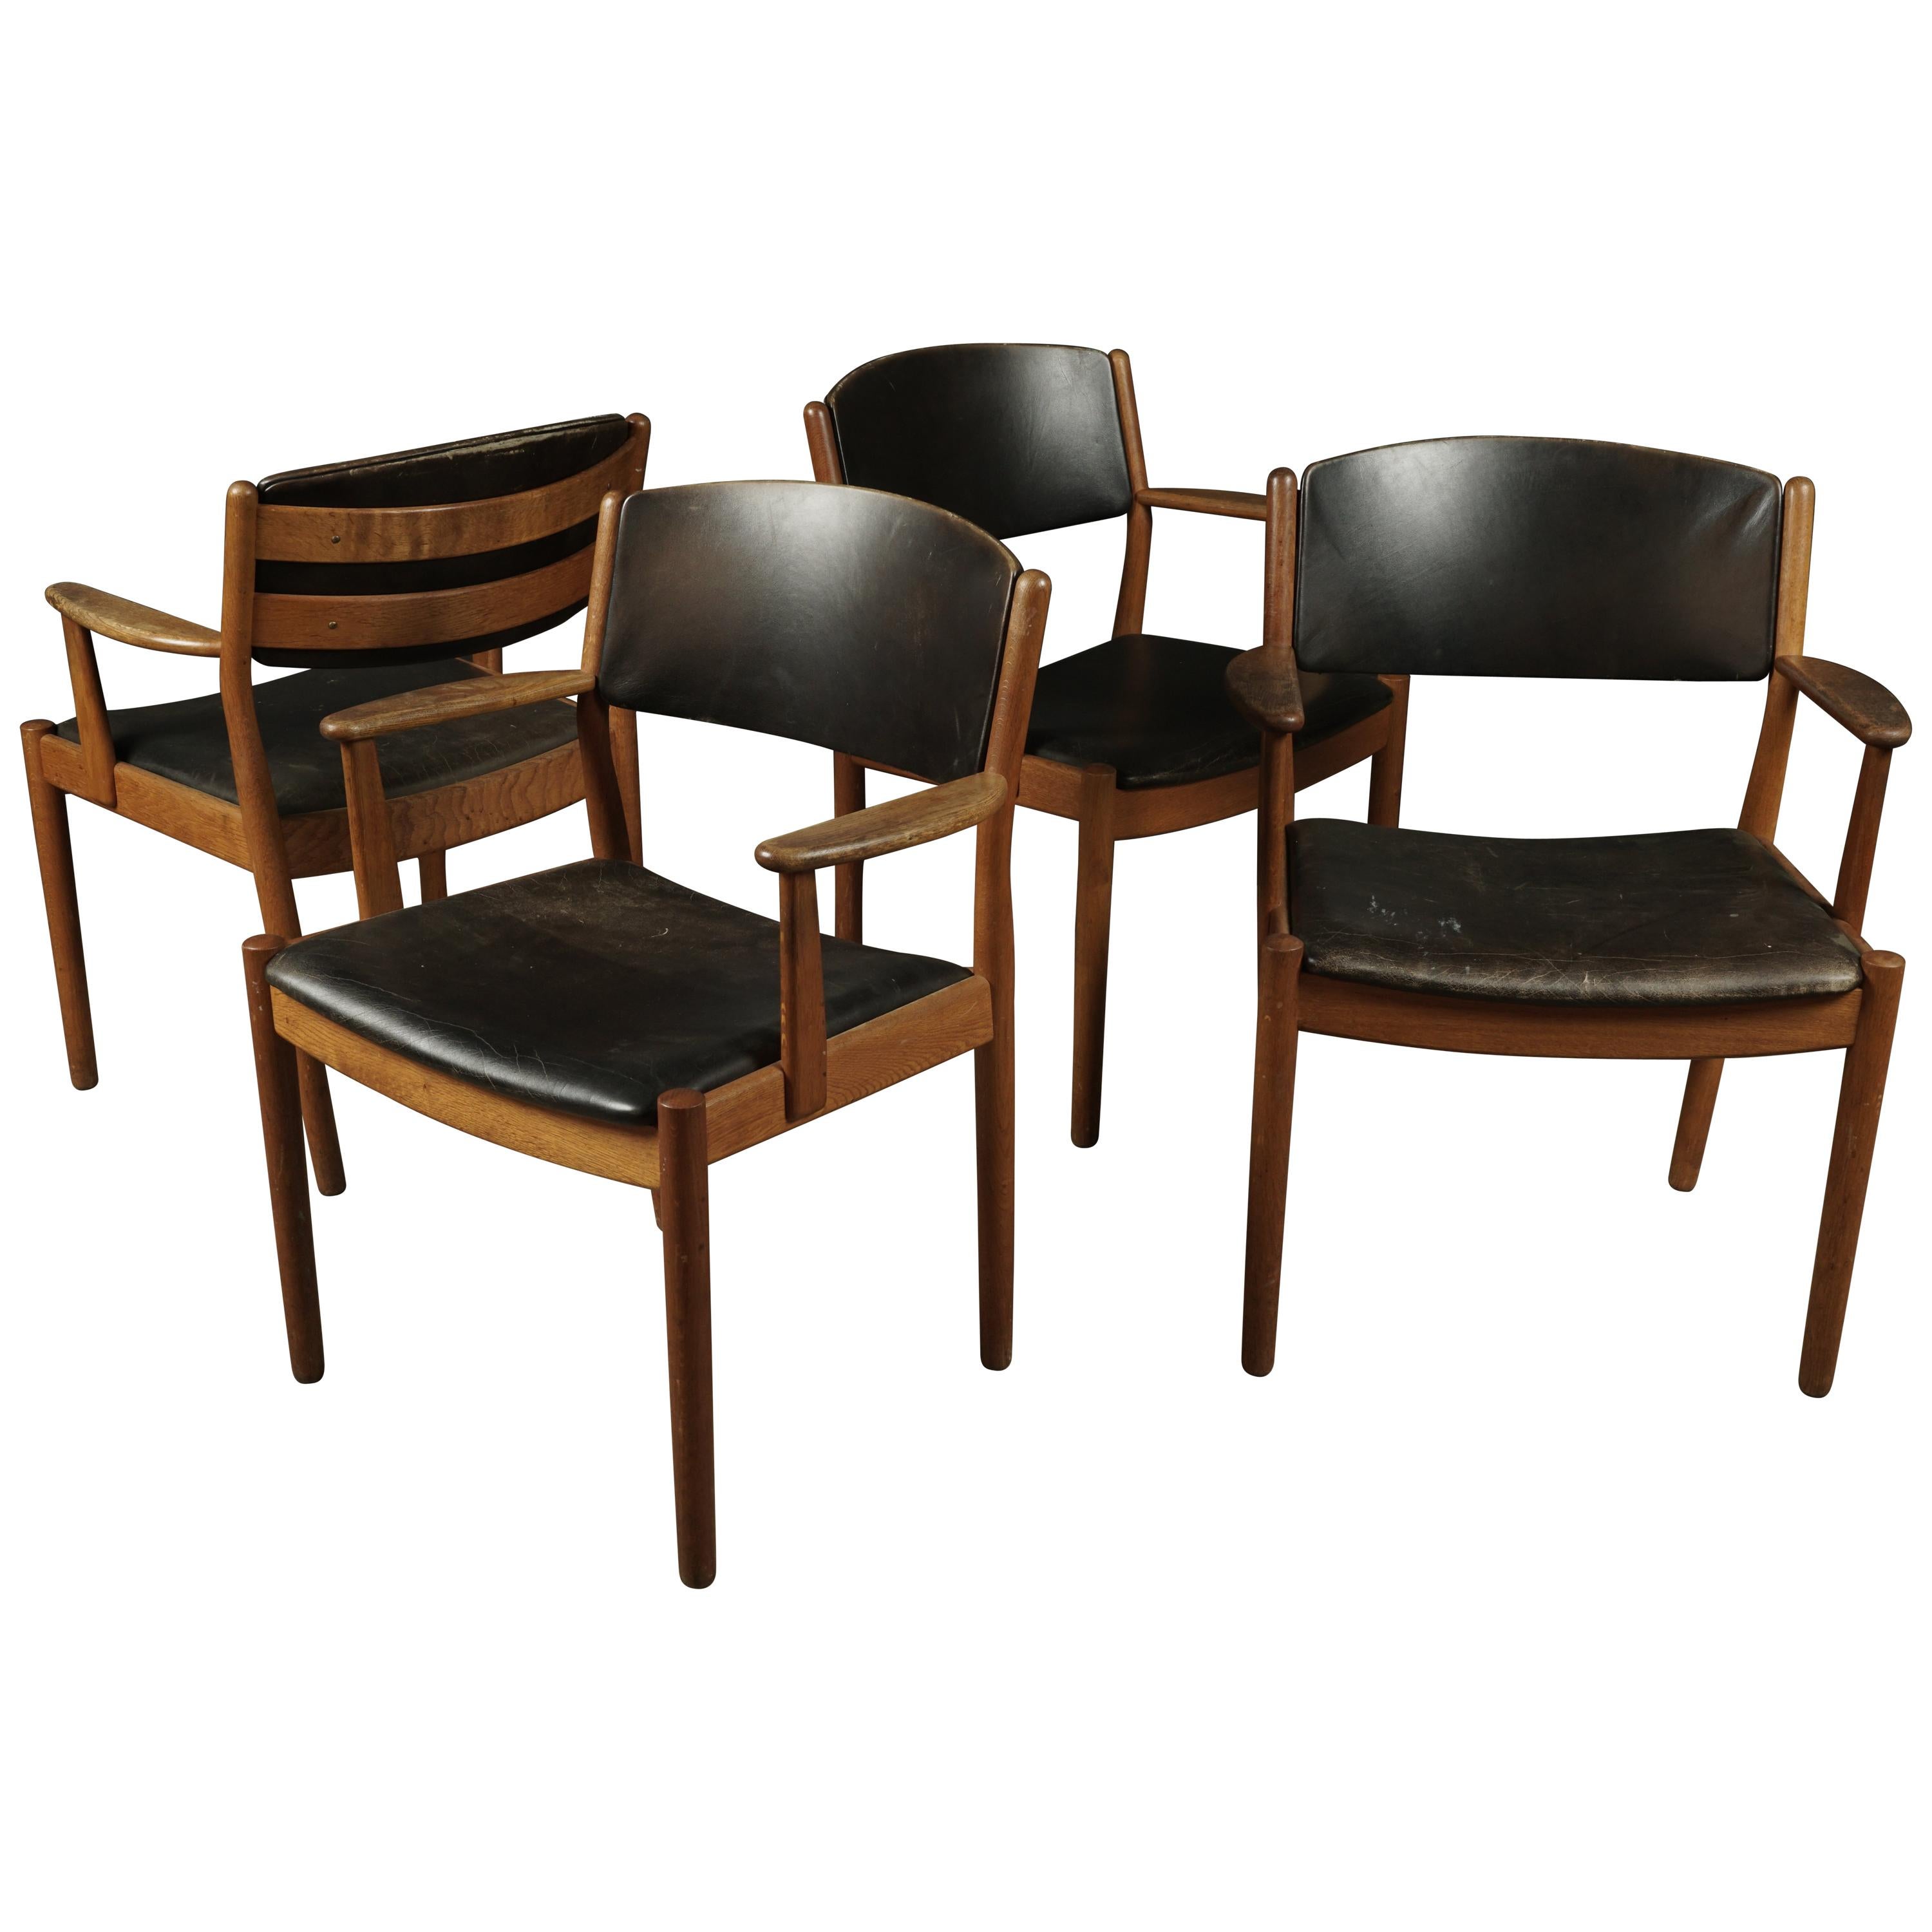 Set of Four Mid-Century Armchairs by Poul Volther for FDB Møbler, 1950s